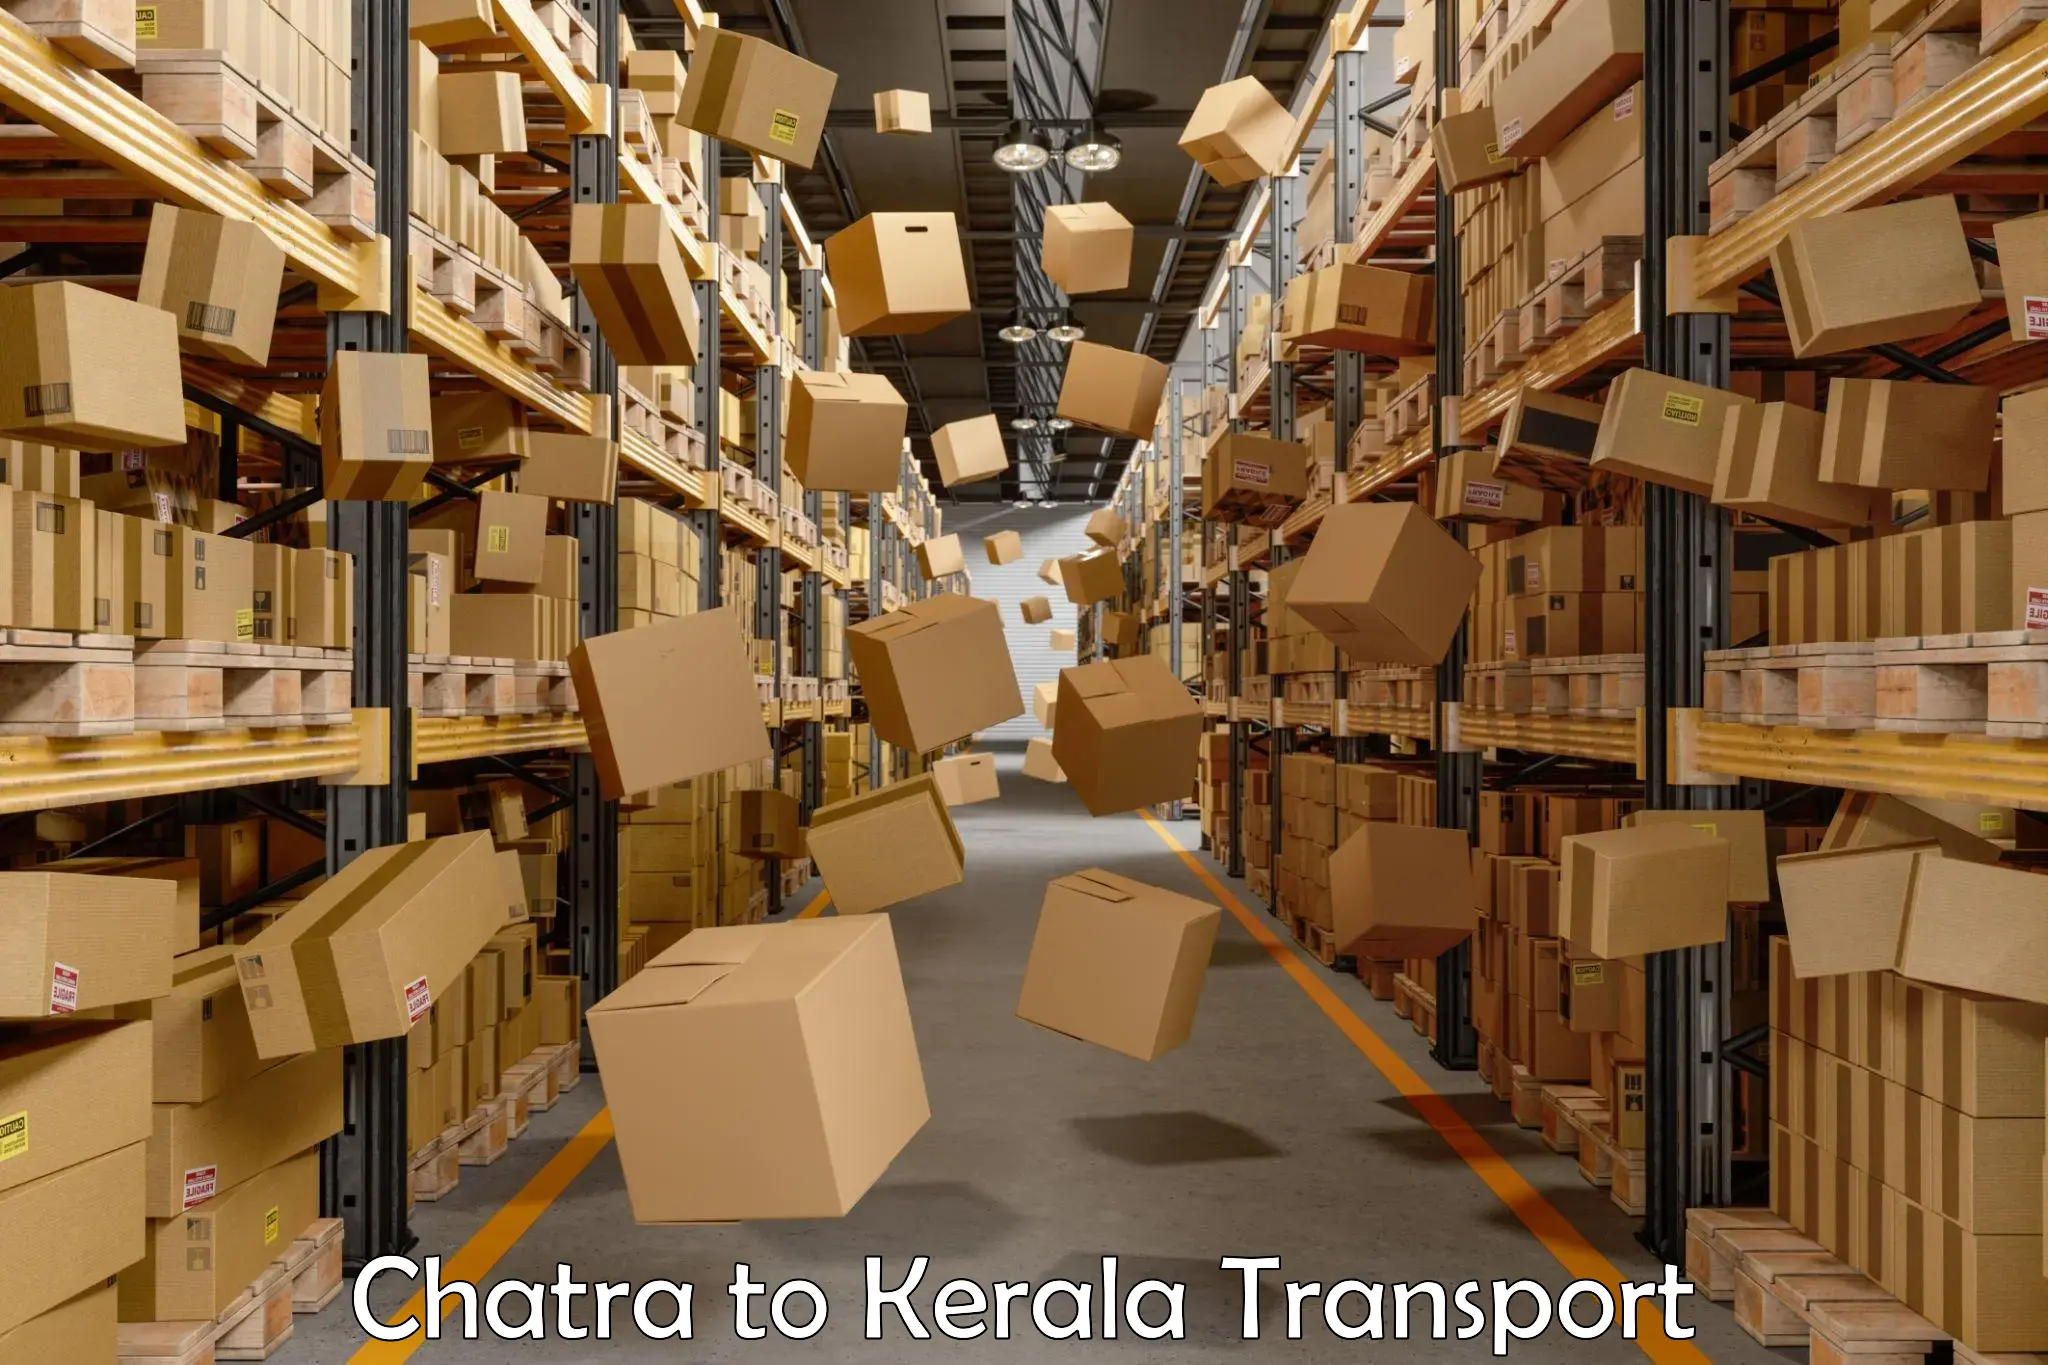 Daily parcel service transport Chatra to Perinthalmanna